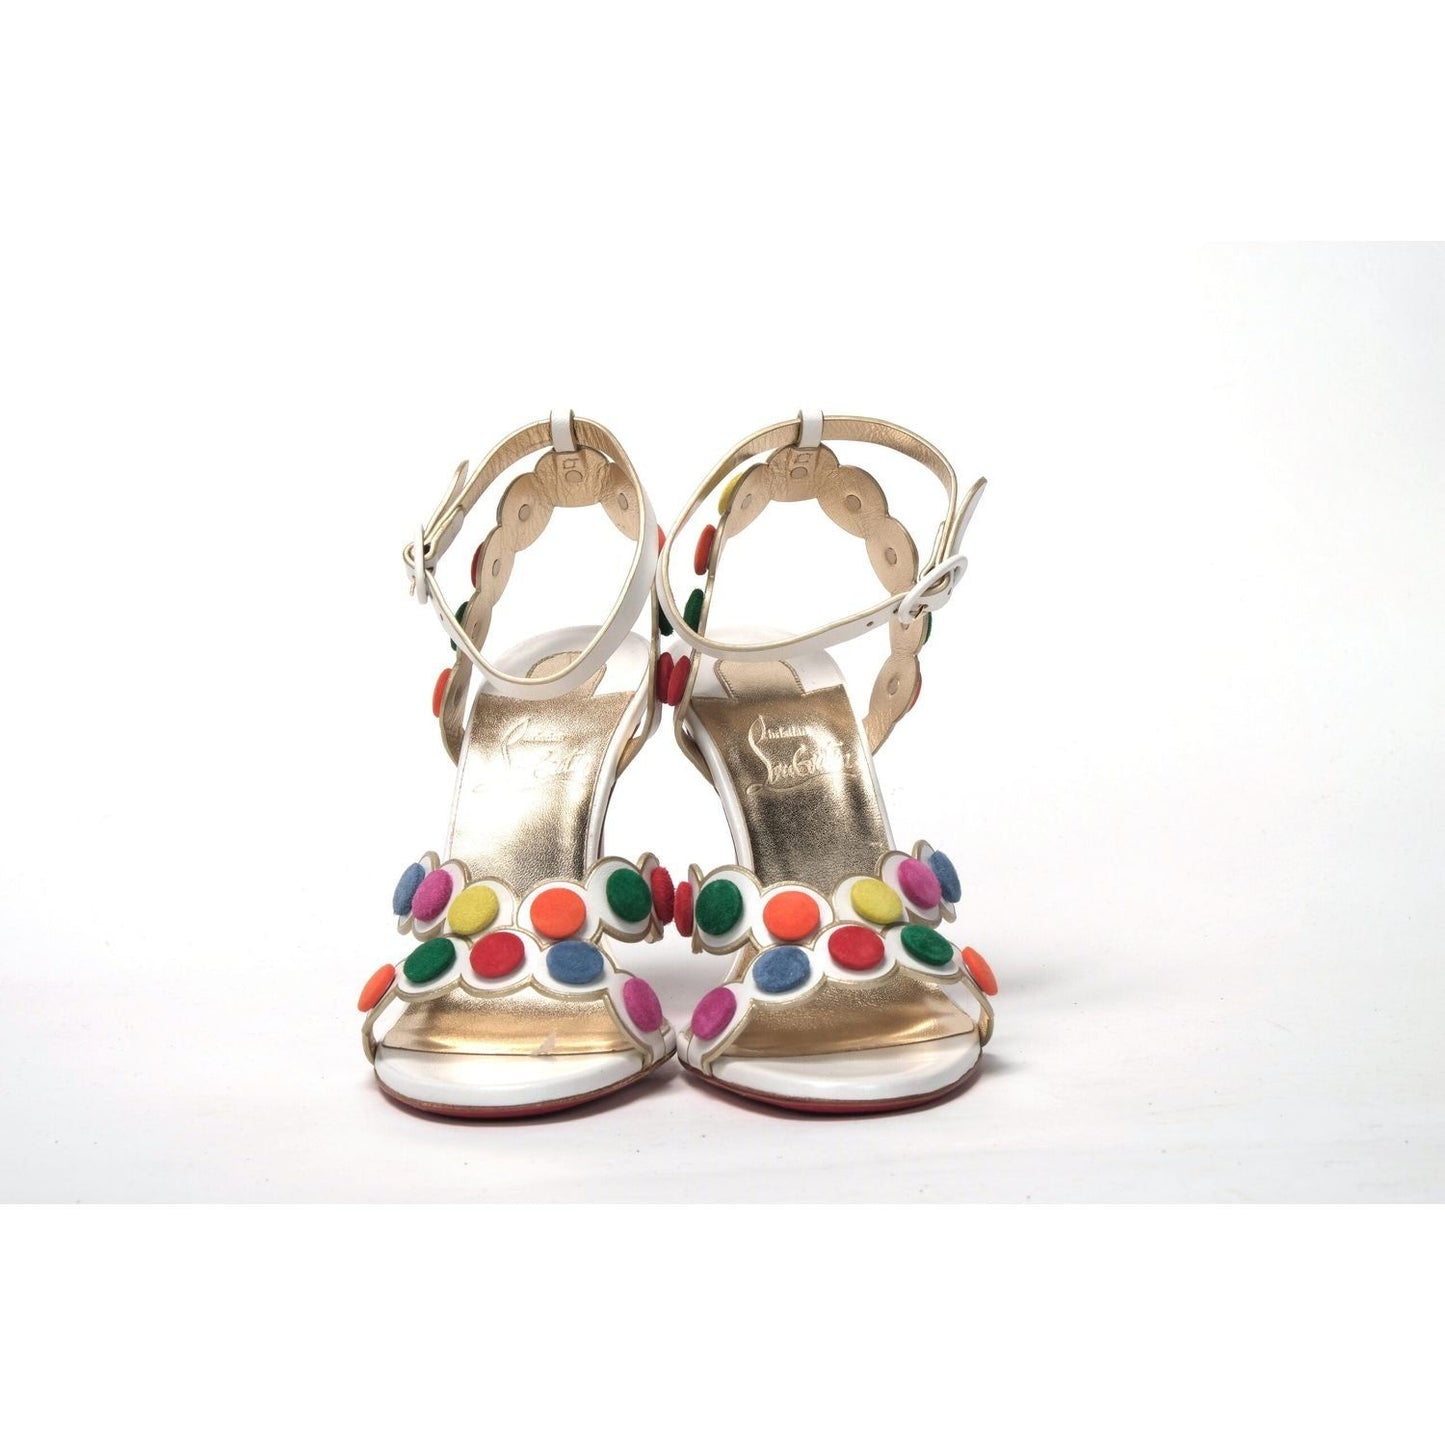 Christian Louboutin White Multicolor Spot Design High Heels Shoes Sandal white-multicolor-spot-design-high-heels-shoes-sandal CL027-SMARTISSIMA-100-KID-IRISE-LINING-VERS-MULTI_LIN-MEKONGWHITE-AND-MULTI-1-FRONT-scaled-a87af8b8-73e.jpg